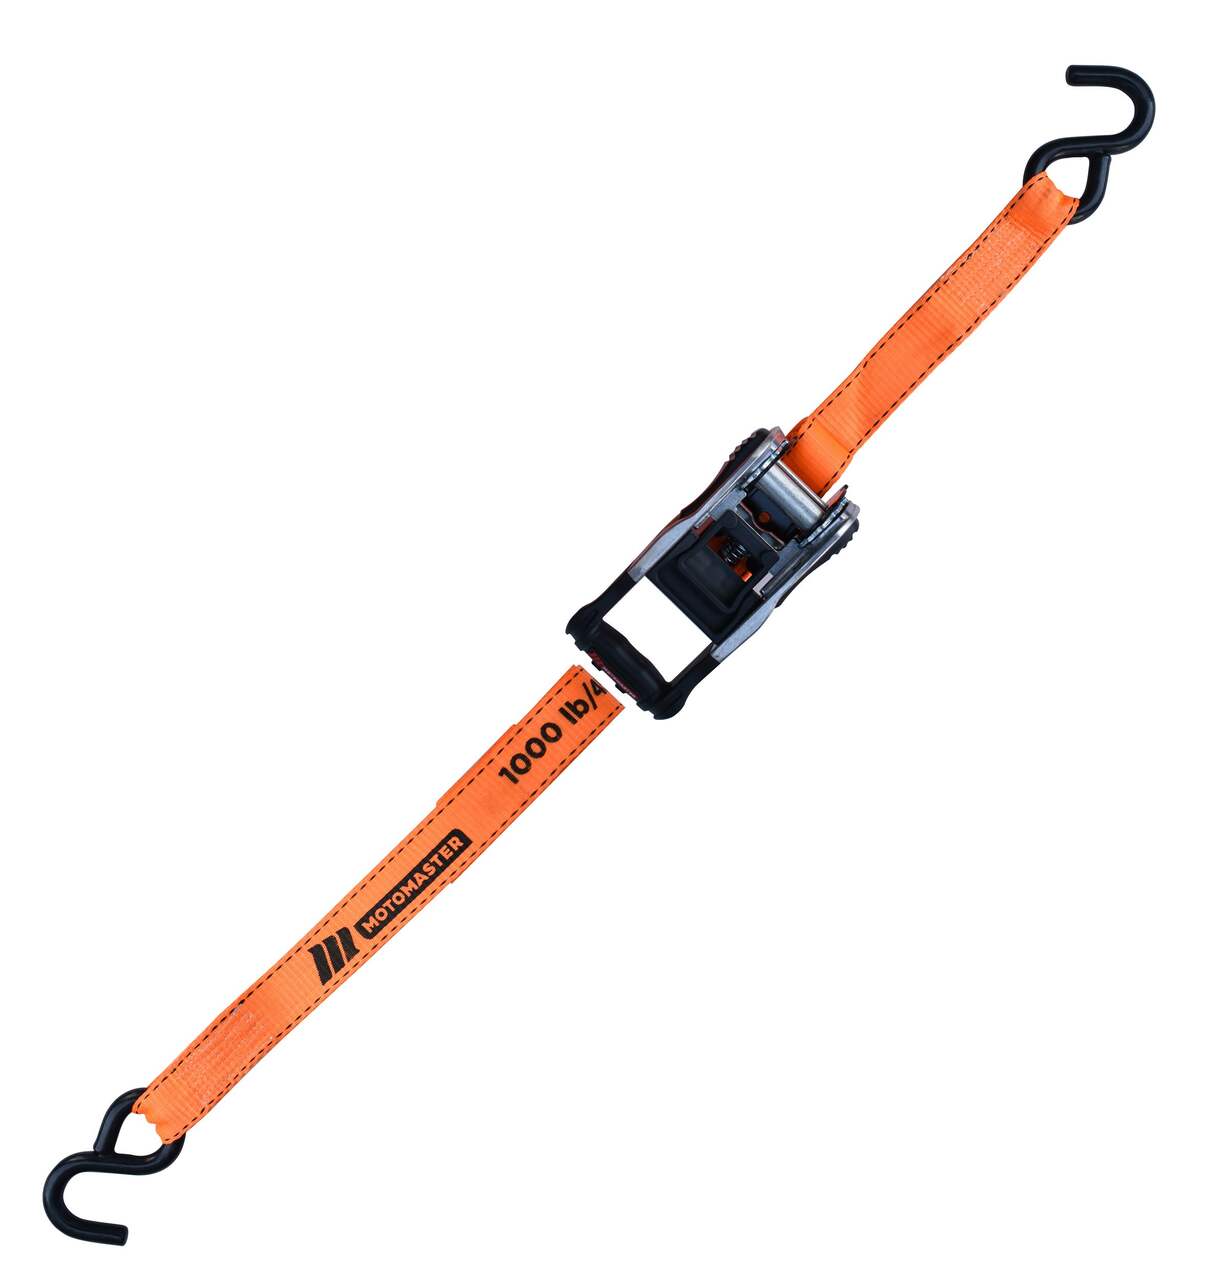 MotoMaster 9,000-lb Tow Strap, with Rust-Resistant Hooks, 2-in x 30-ft